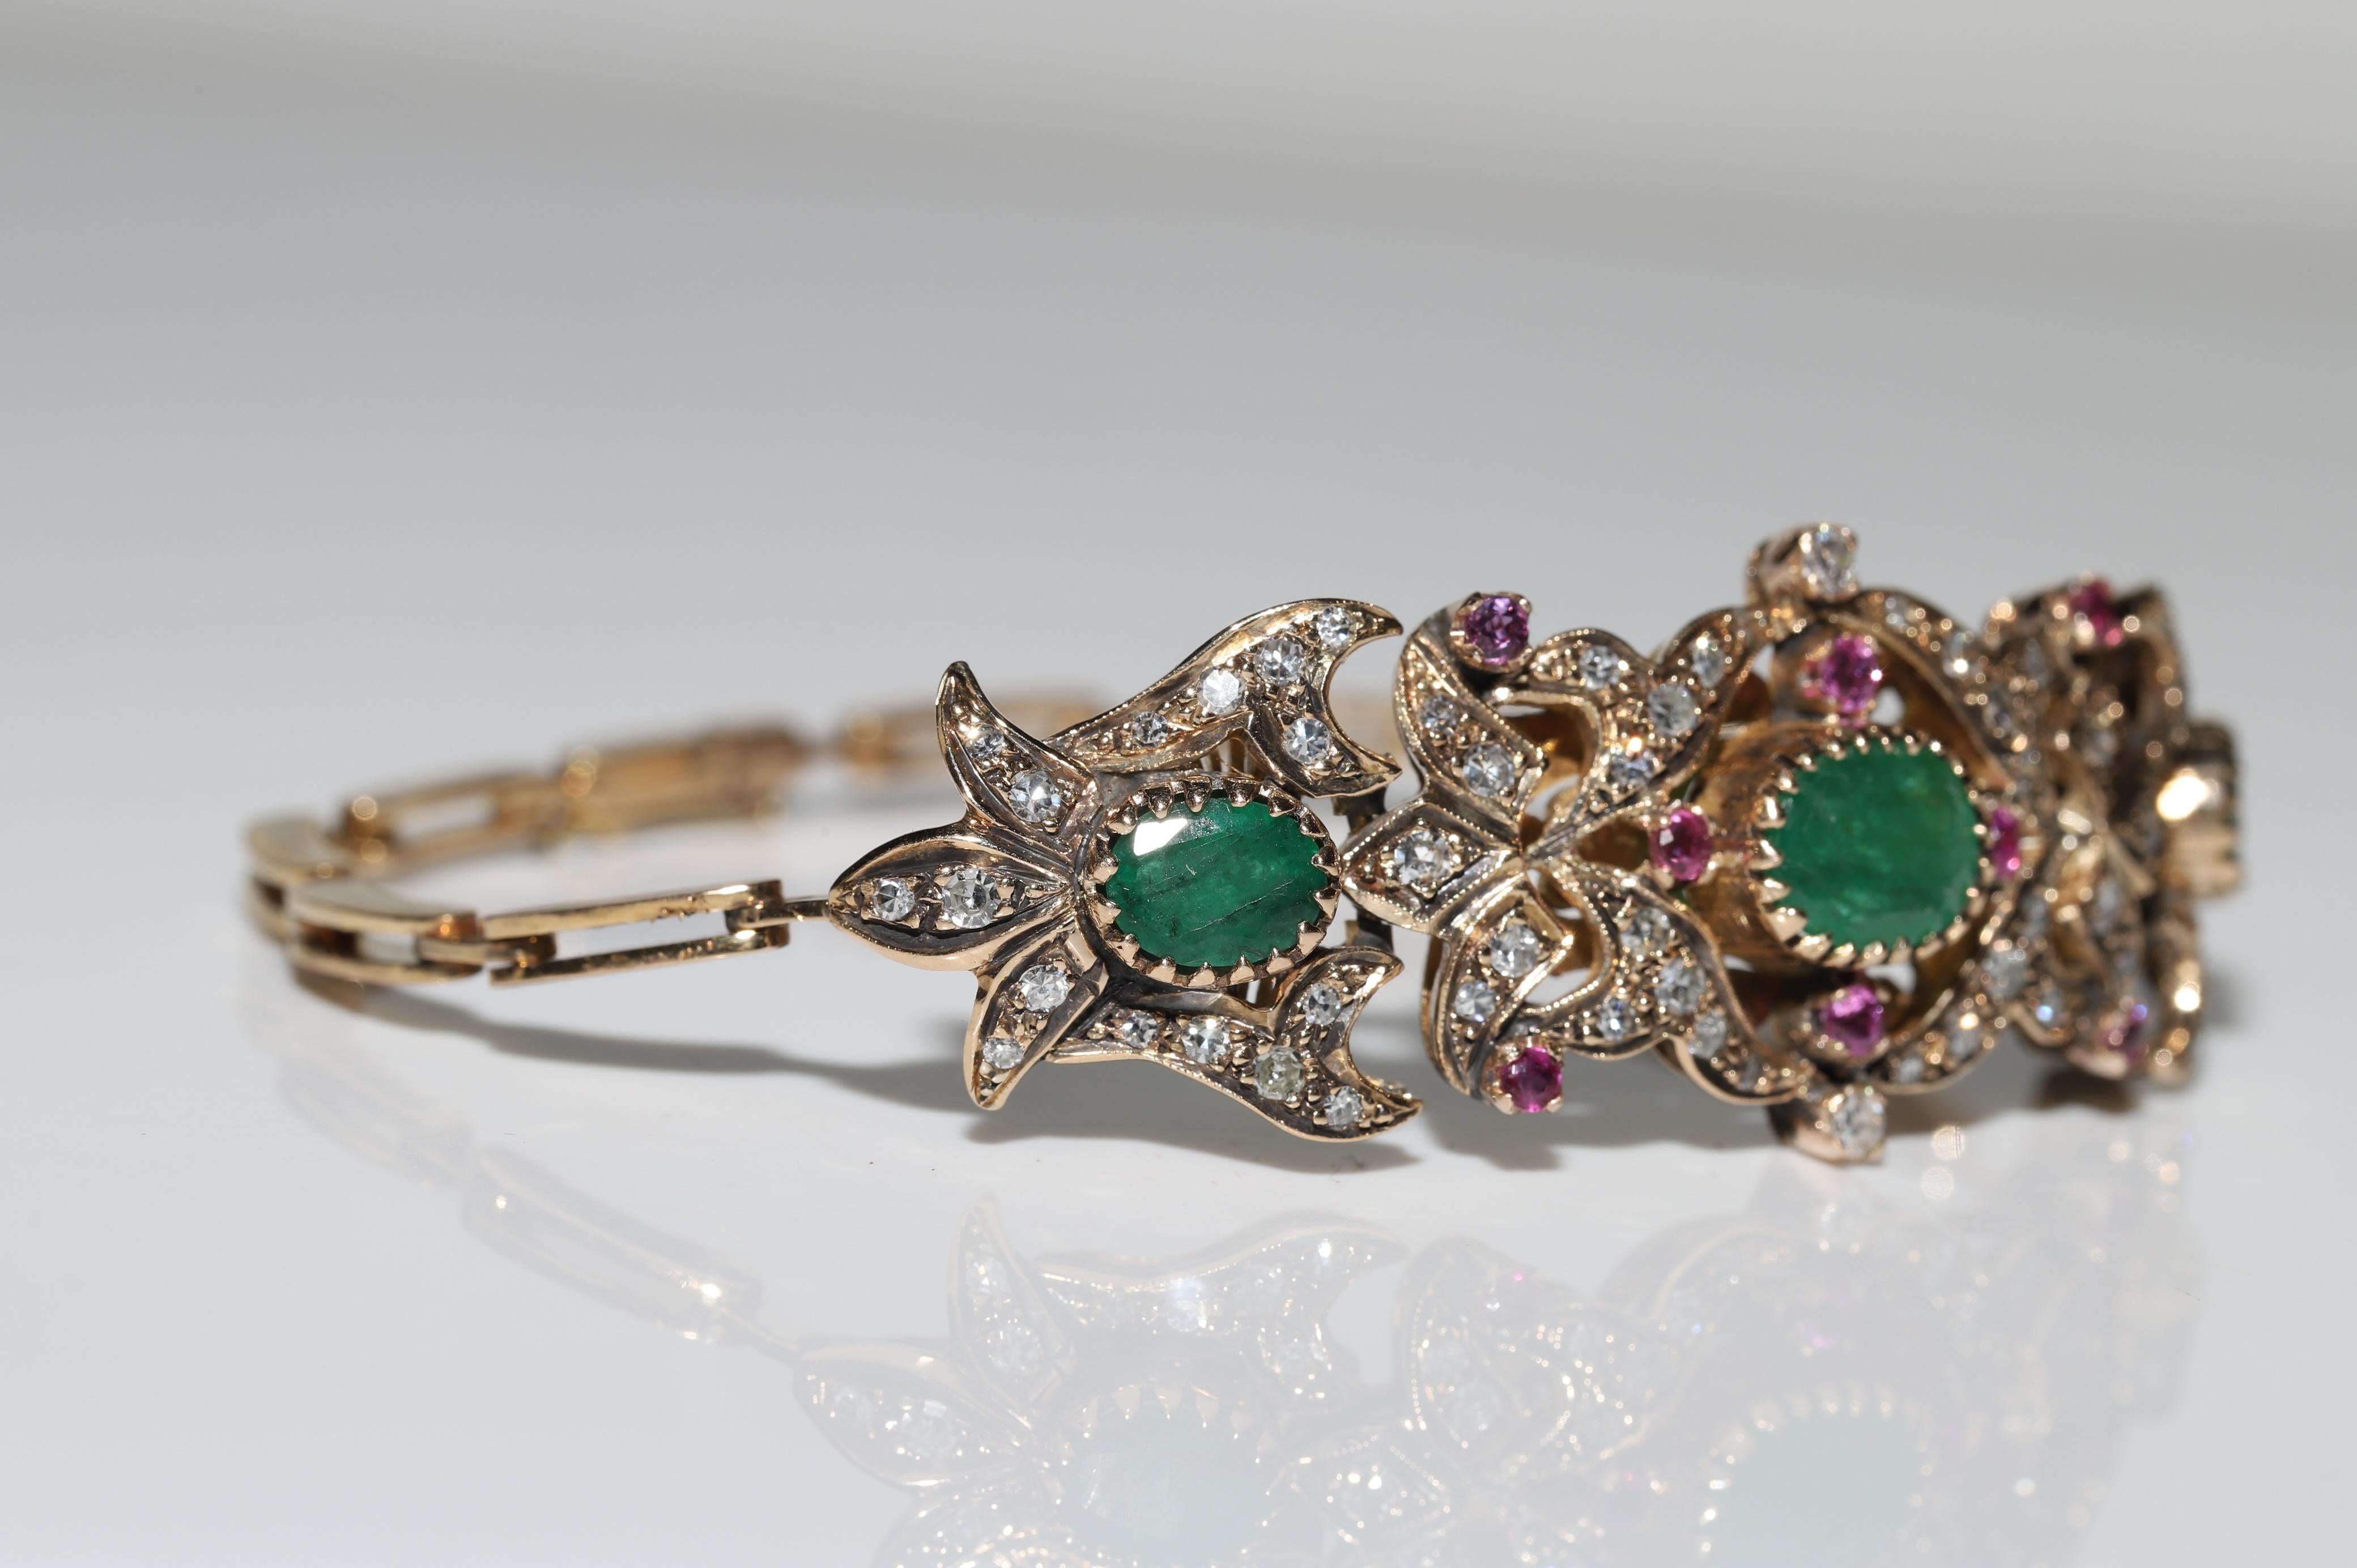 Vintage Circa 1960s 14k Gold Natural Diamond And Emerald And Ruby Bracelet For Sale 4